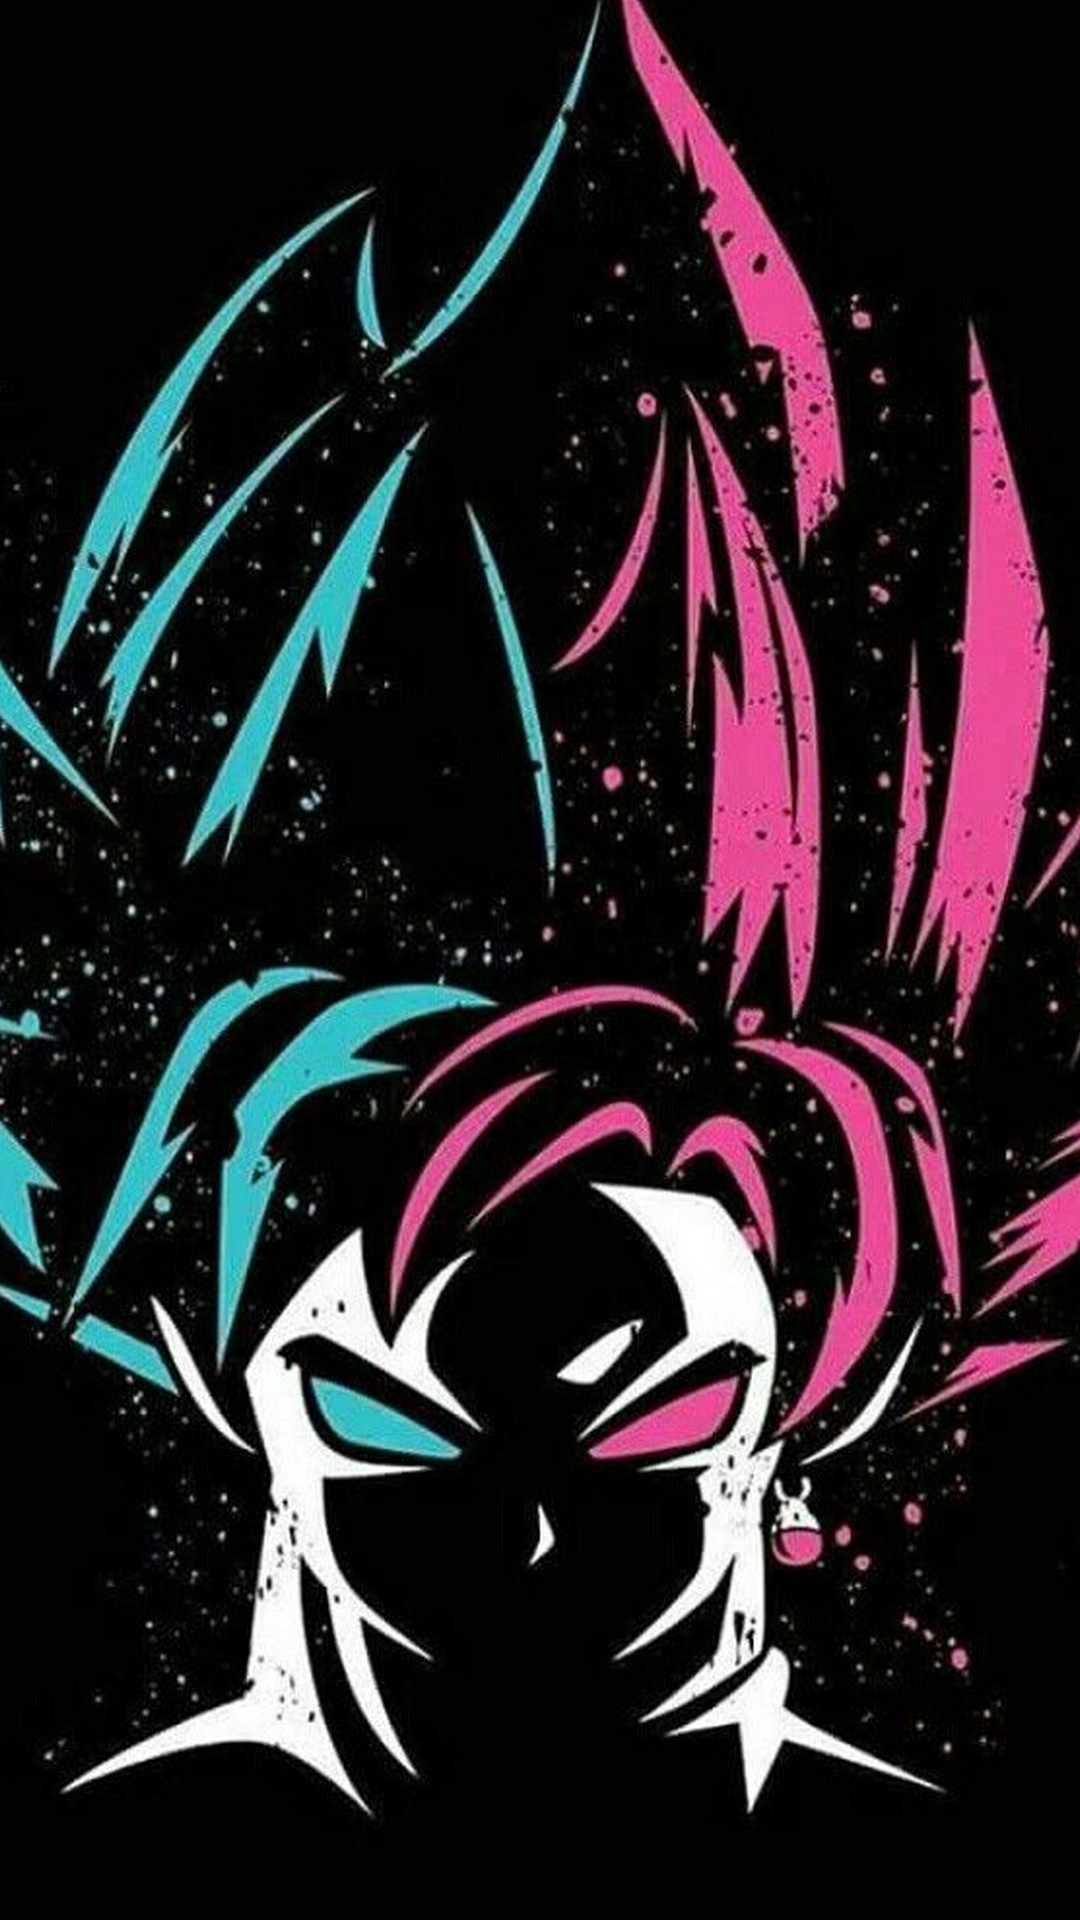 Black Goku Android Wallpaper with high-resolution 1080x1920 pixel. You can use and set as wallpaper for Notebook Screensavers, Mac Wallpapers, Mobile Home Screen, iPhone or Android Phones Lock Screen